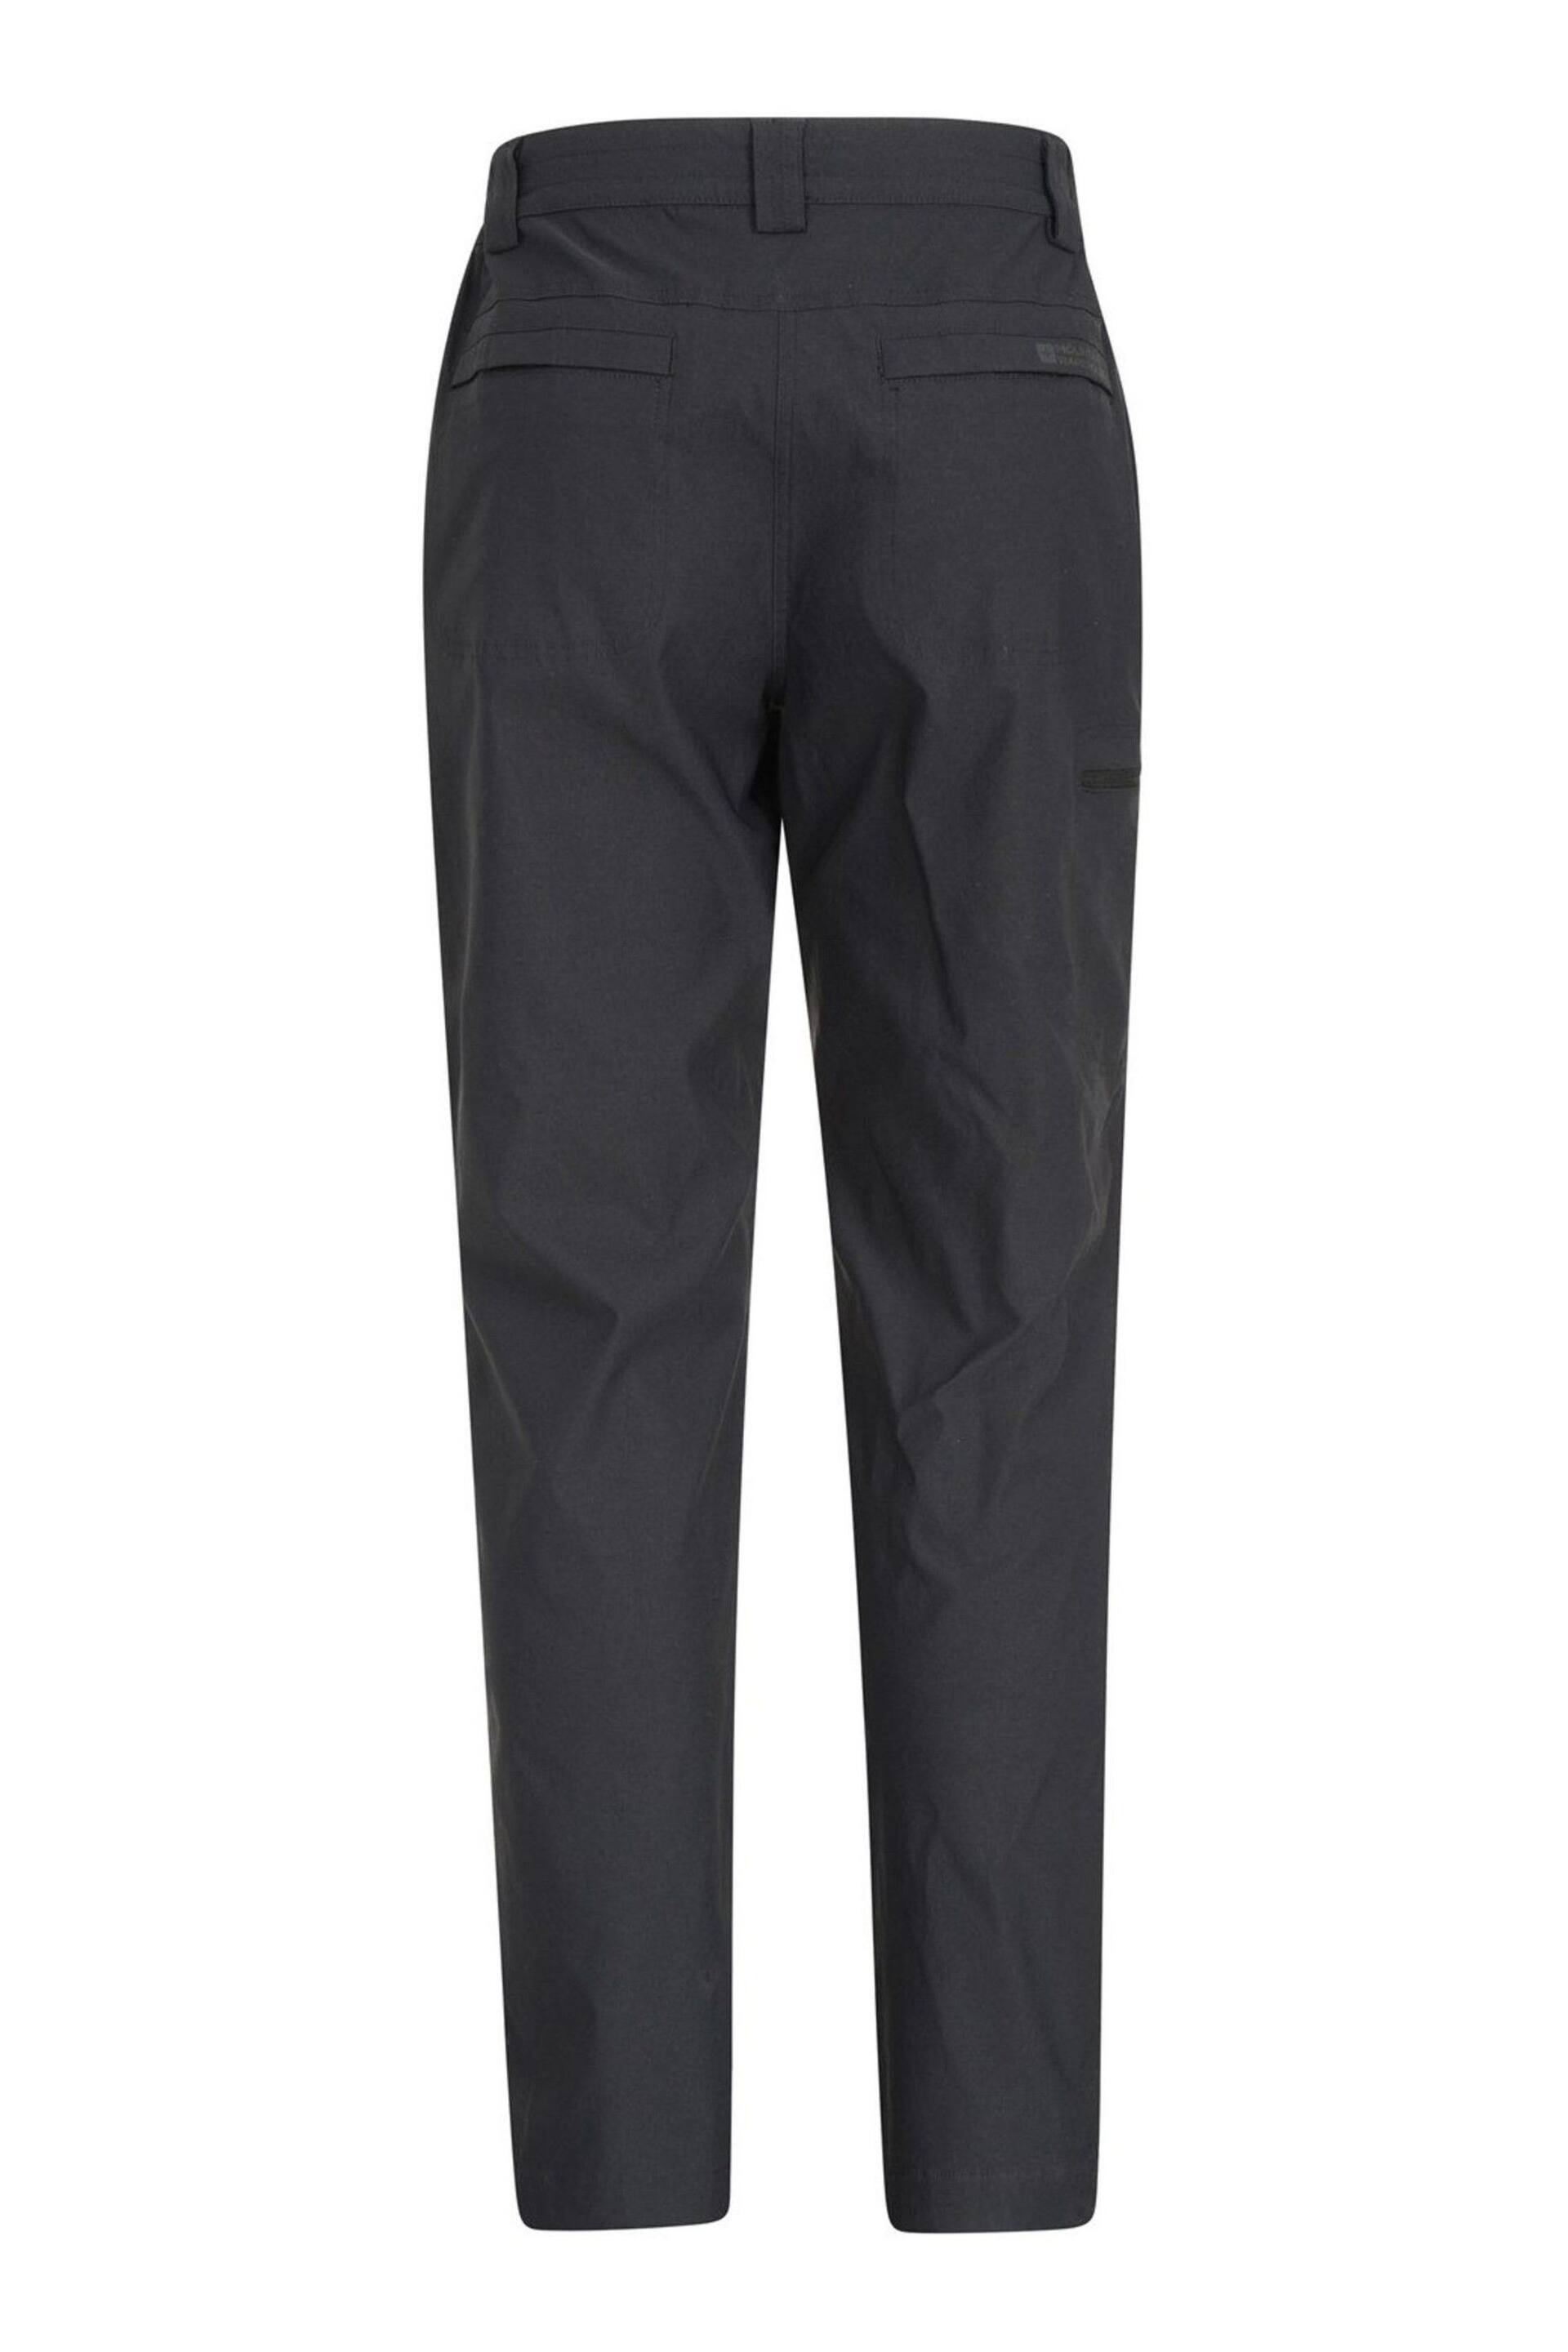 Mountain Warehouse Black Hiker Womens Lightweight Stretch, UV Protect Walking Trousers - Short Length - Image 4 of 4